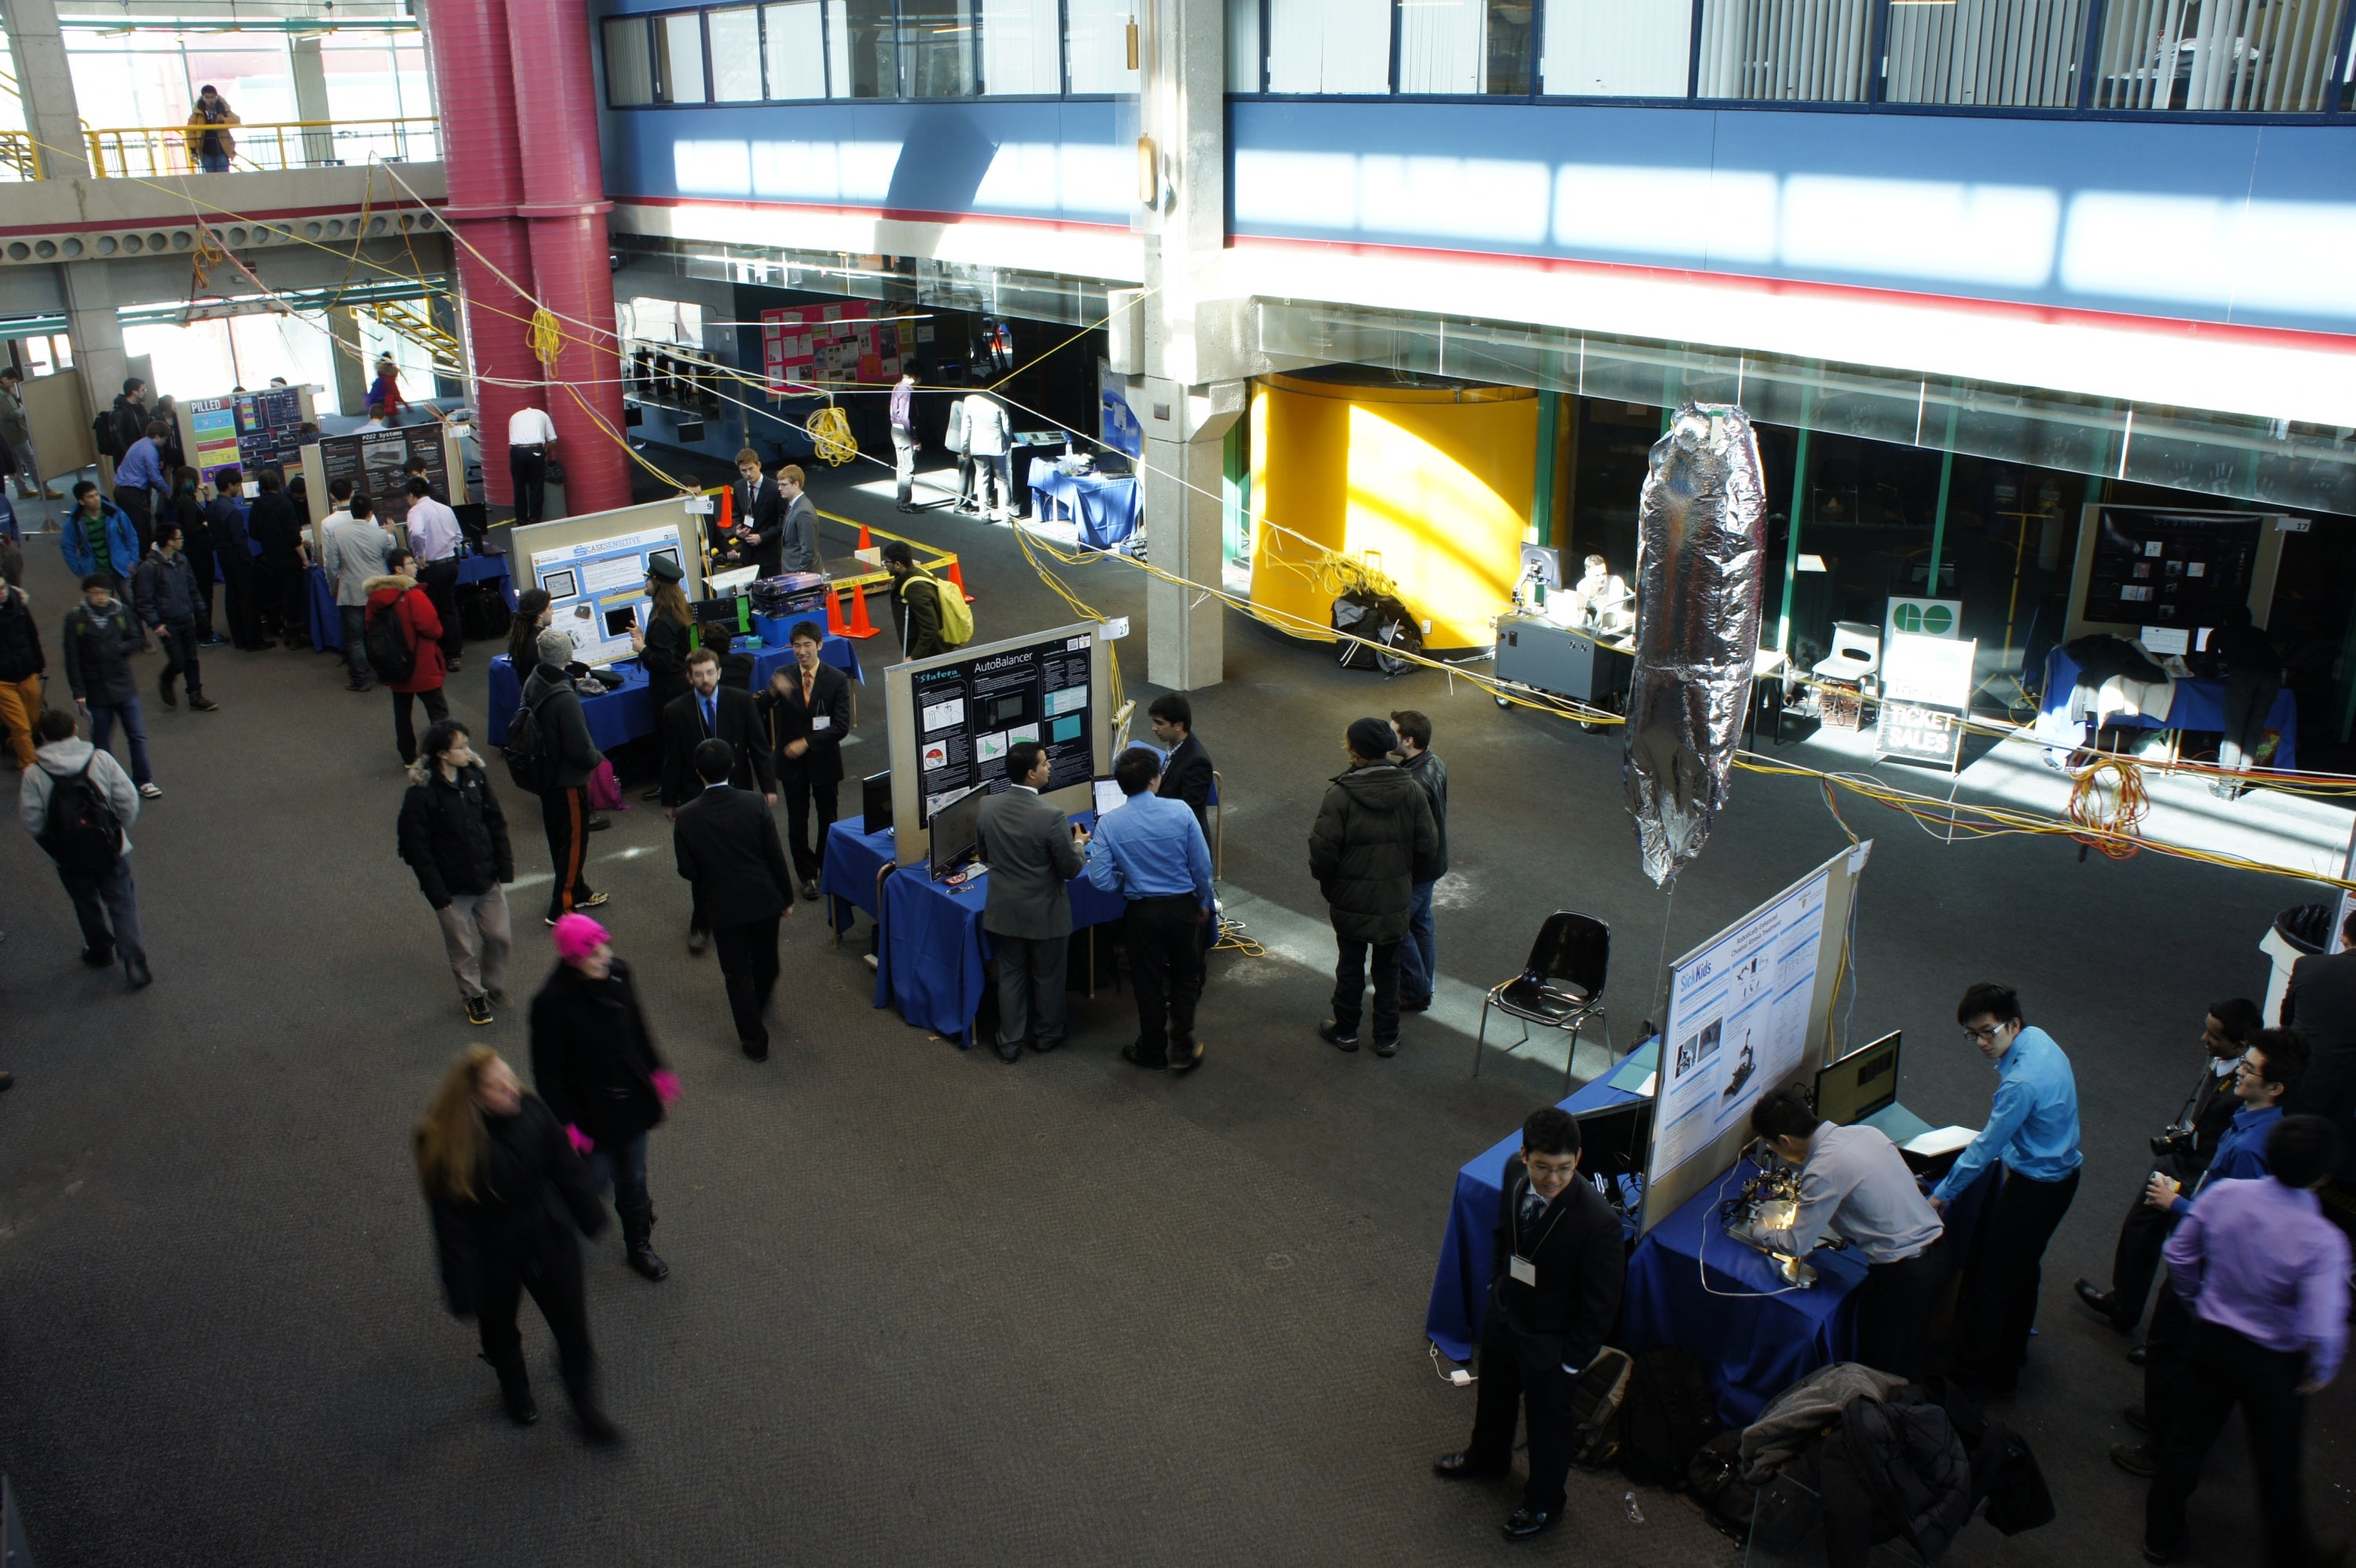 Overhead view of the 2014 Mechatronics Design Symposium in the DC building, University of Waterloo image 2